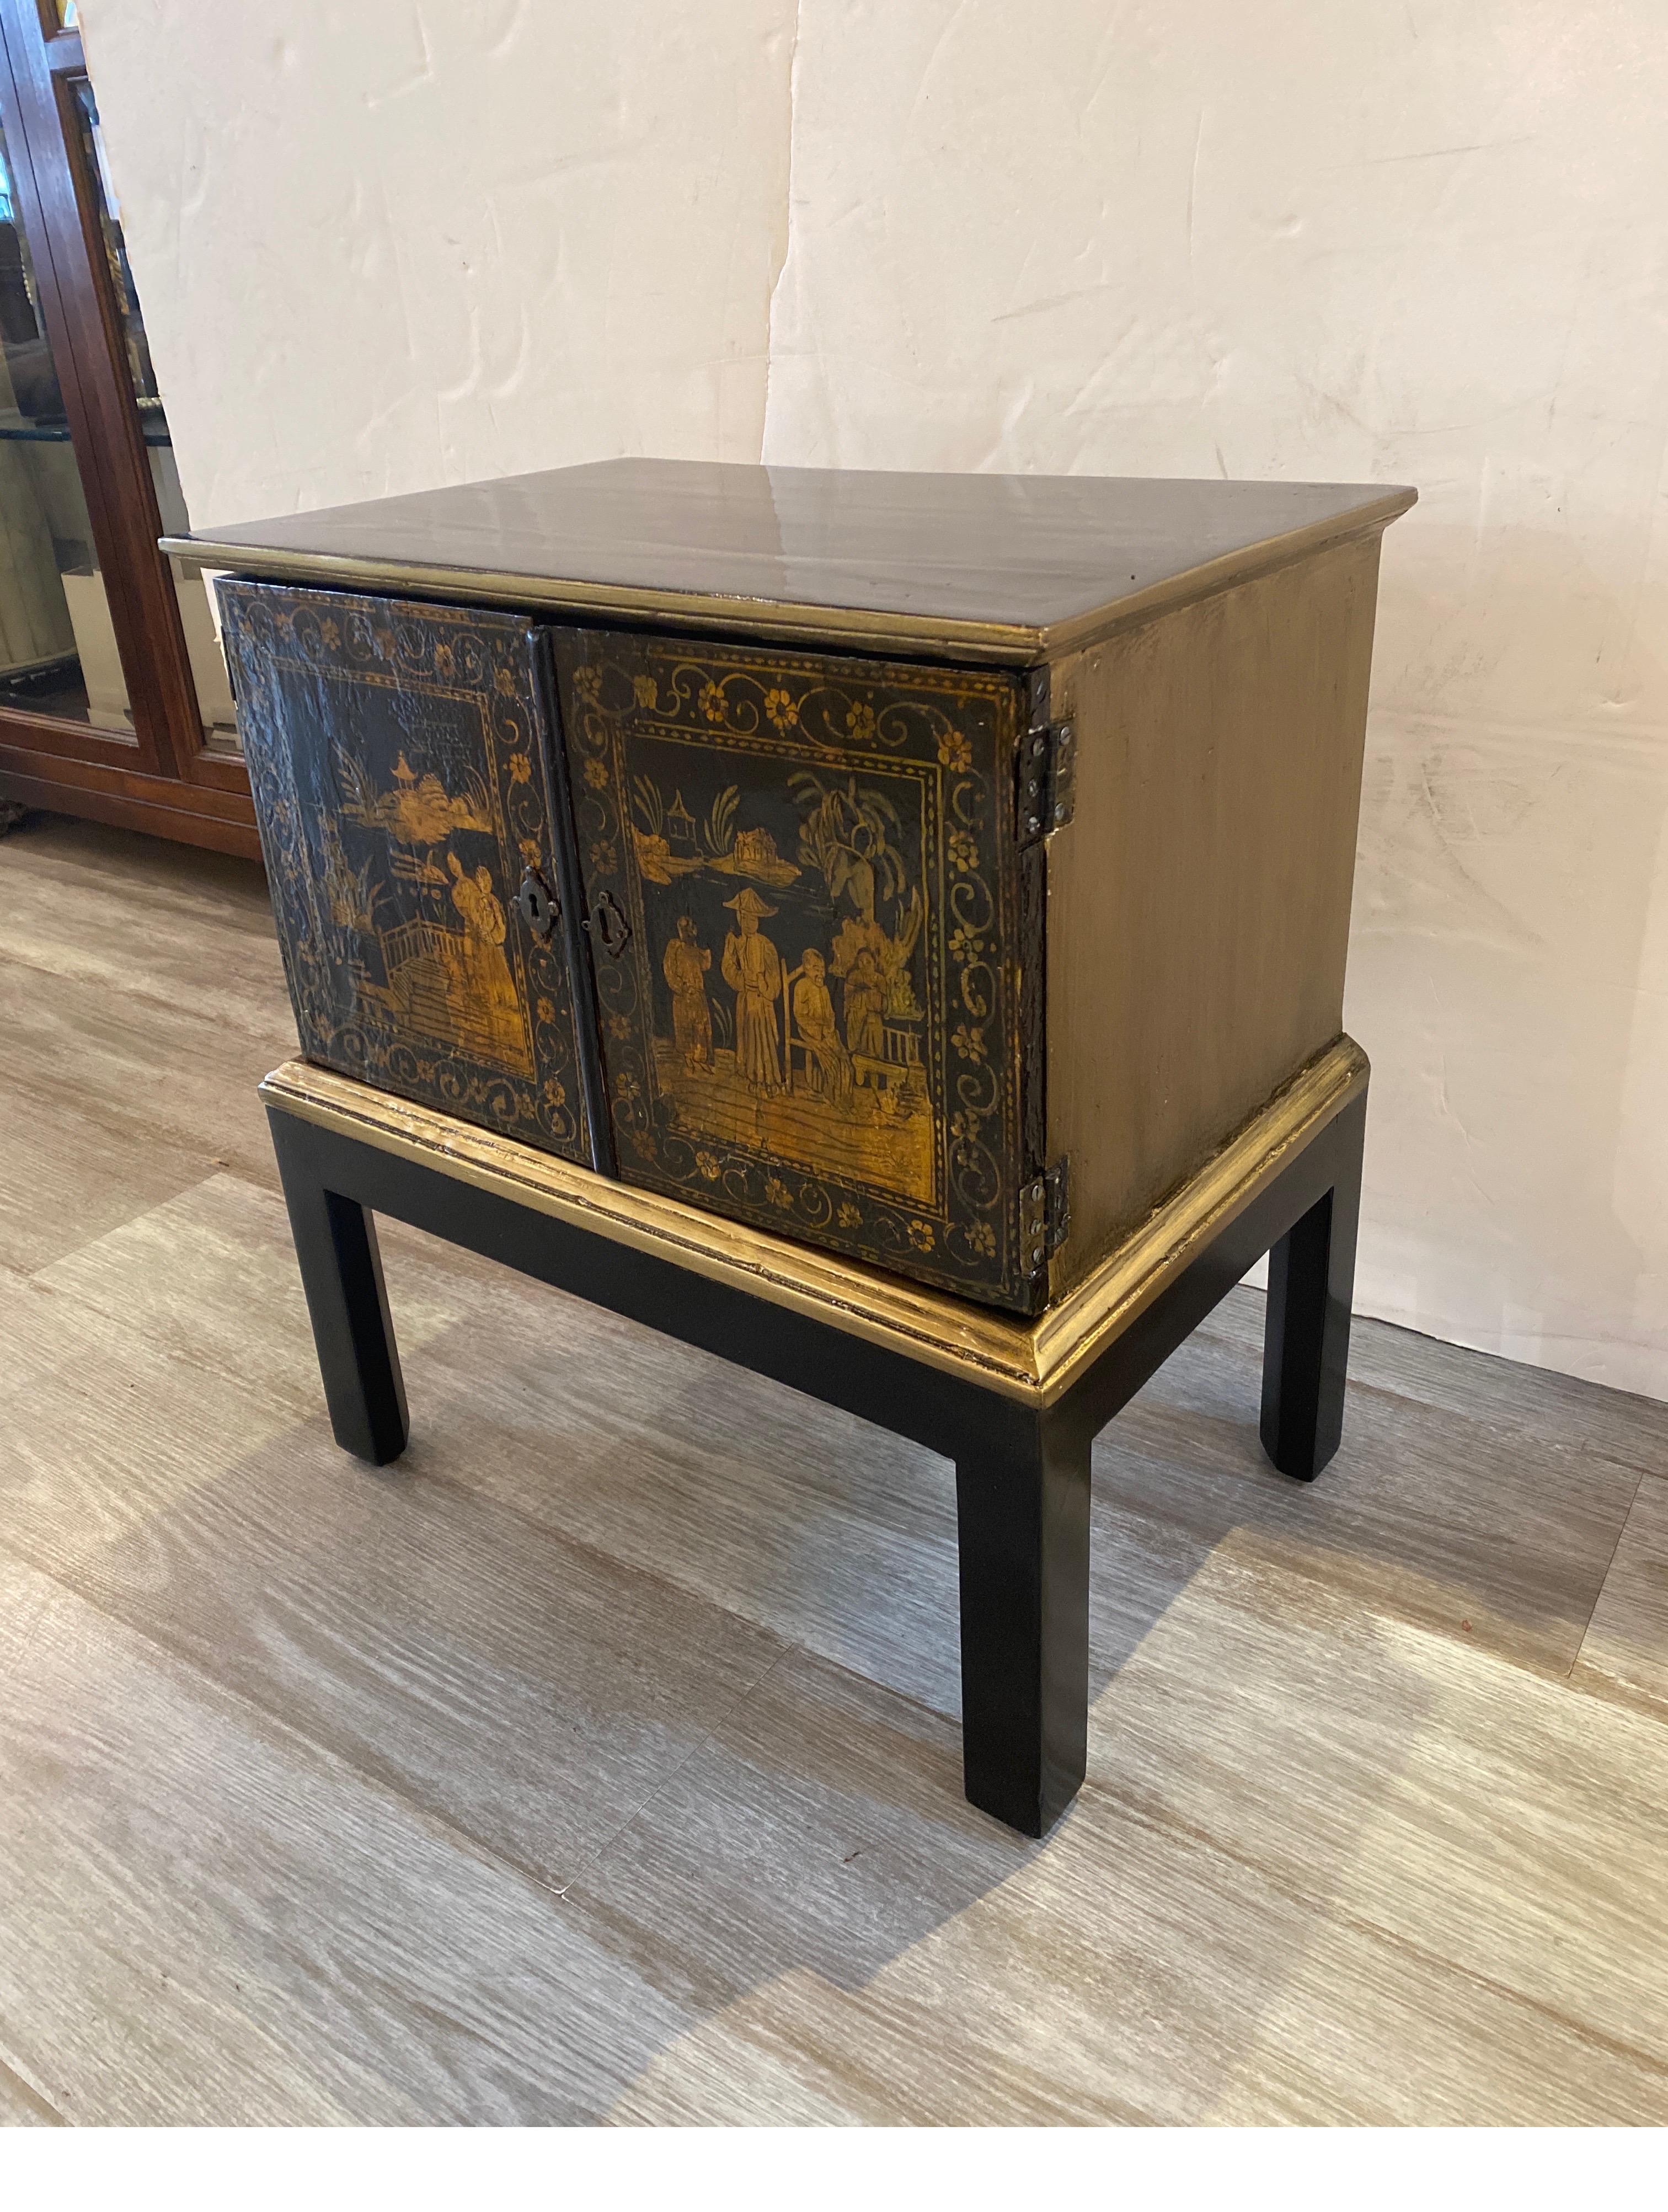 Hardwood Diminutive Anglo-Indian Black and Gold Lacquered Spice Cabinet